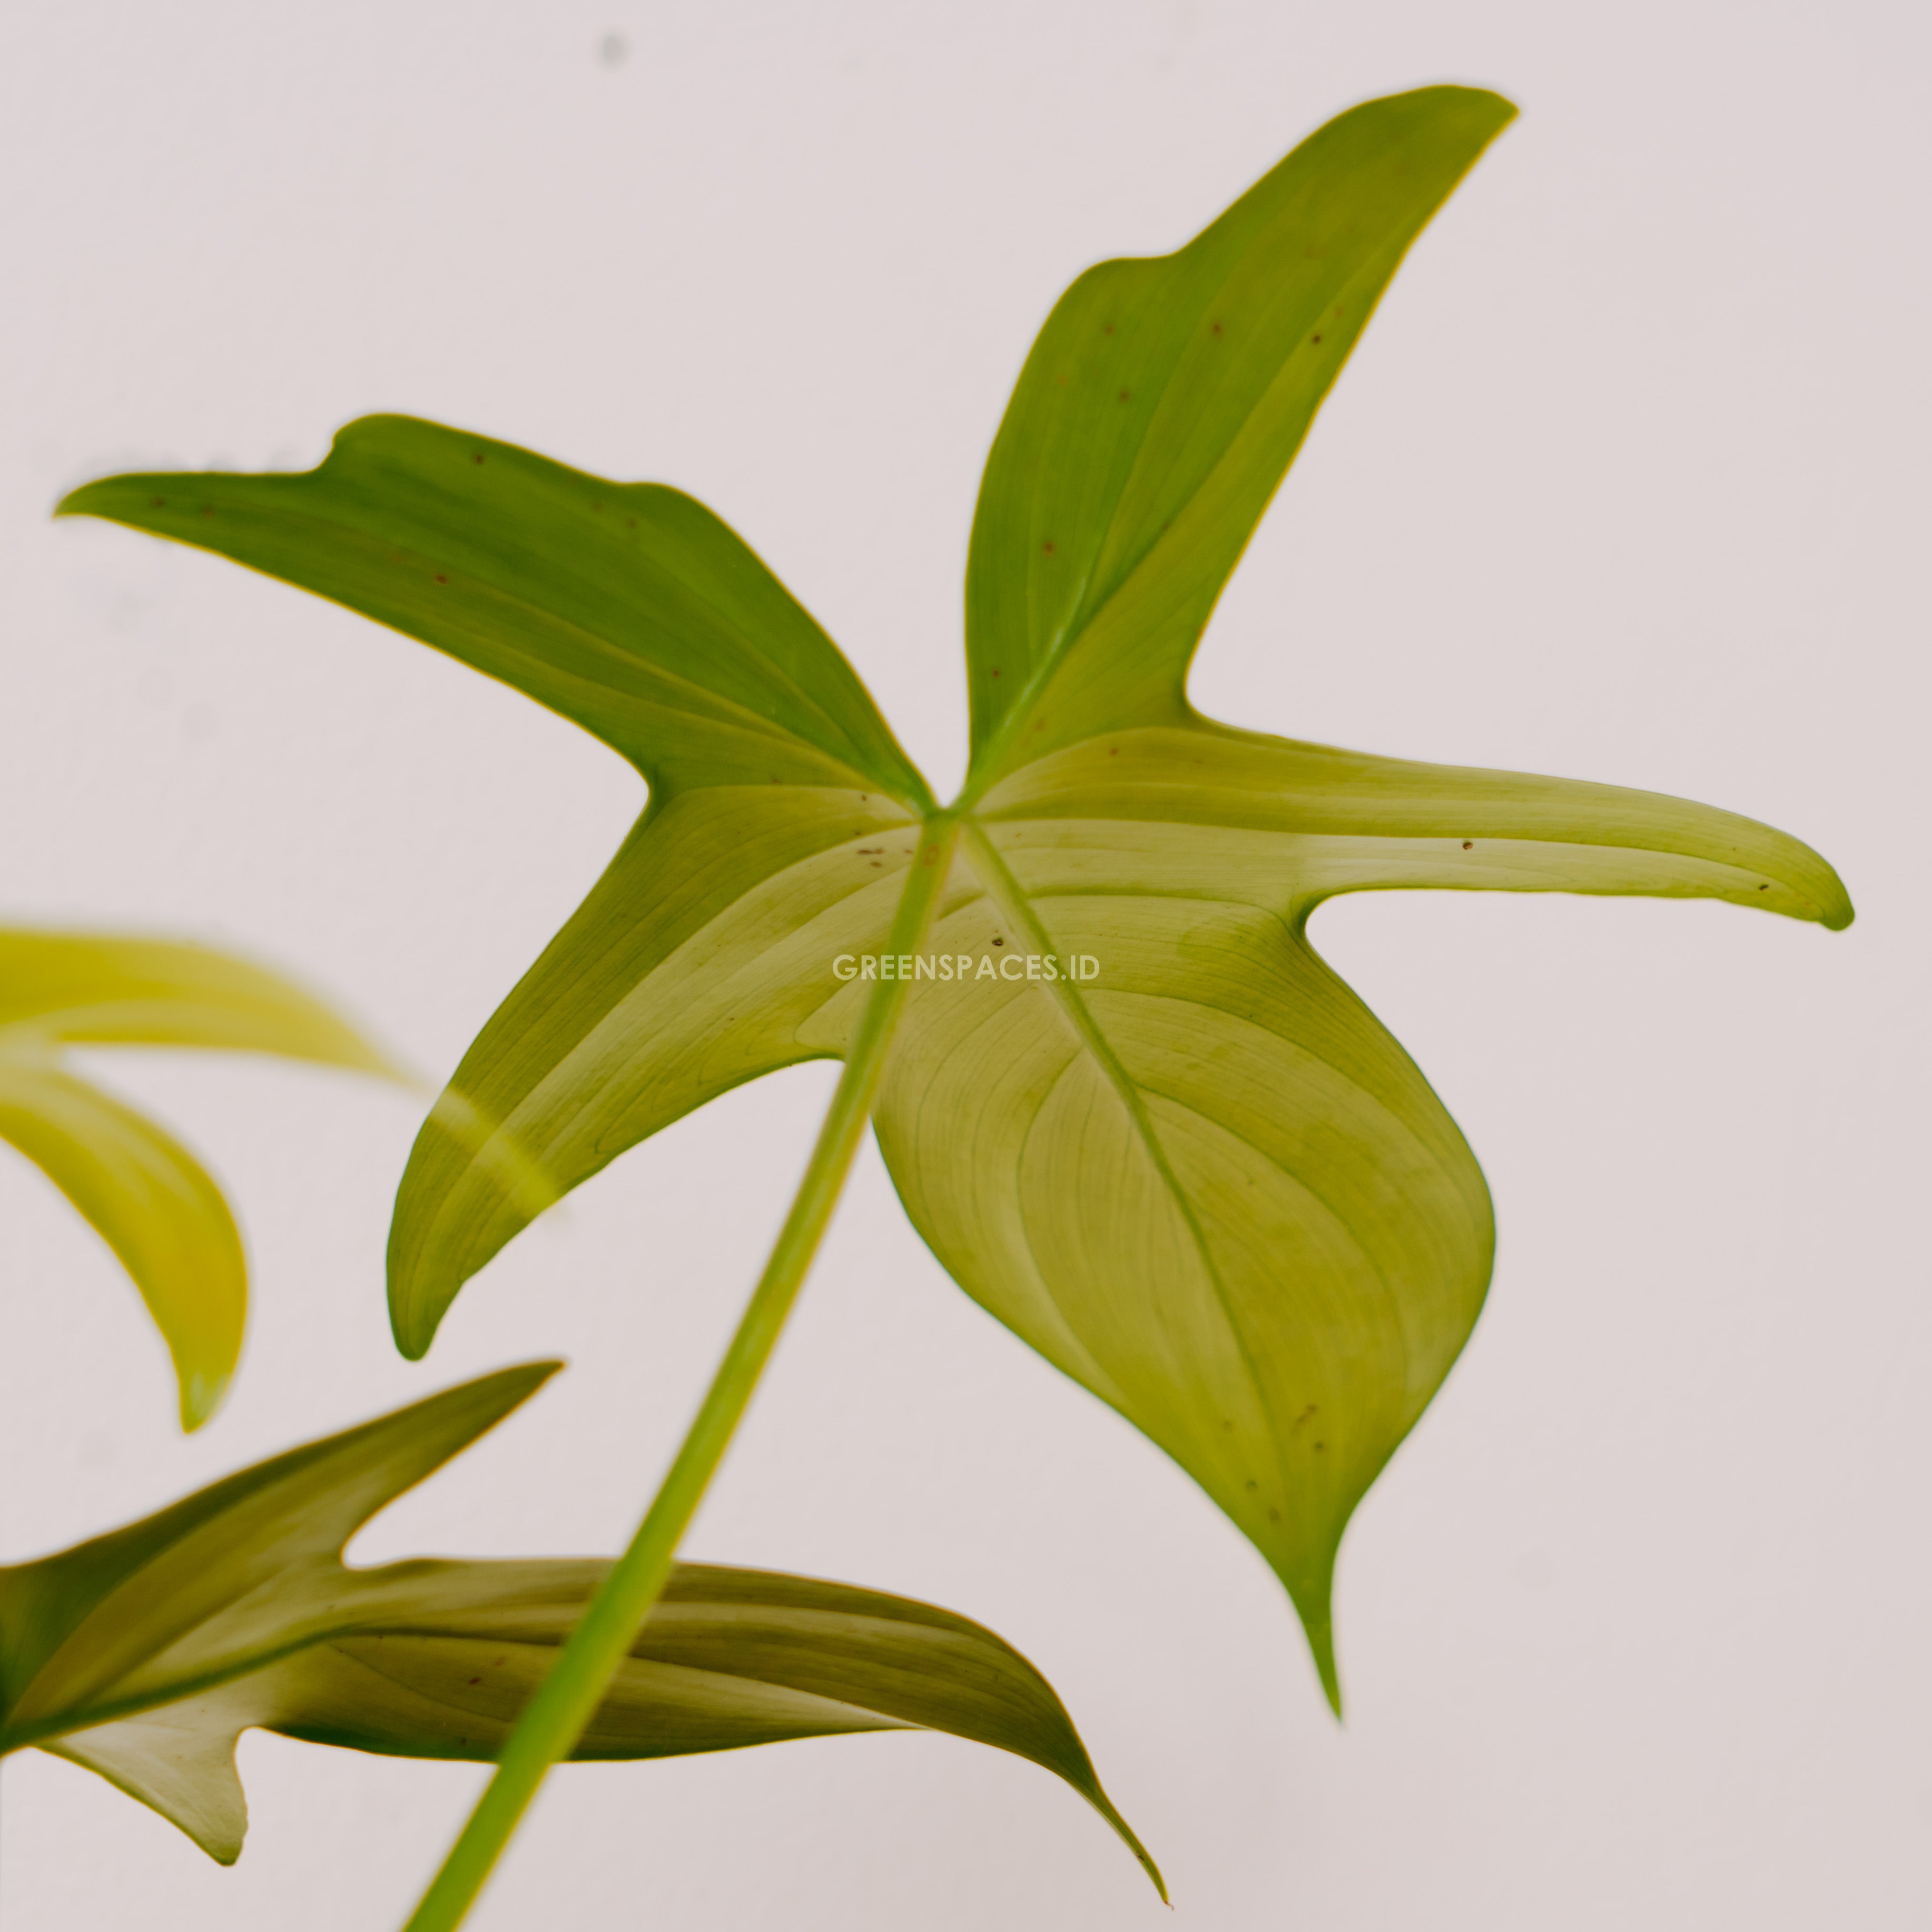 Philodendron Pedatum - Greenspaces.id